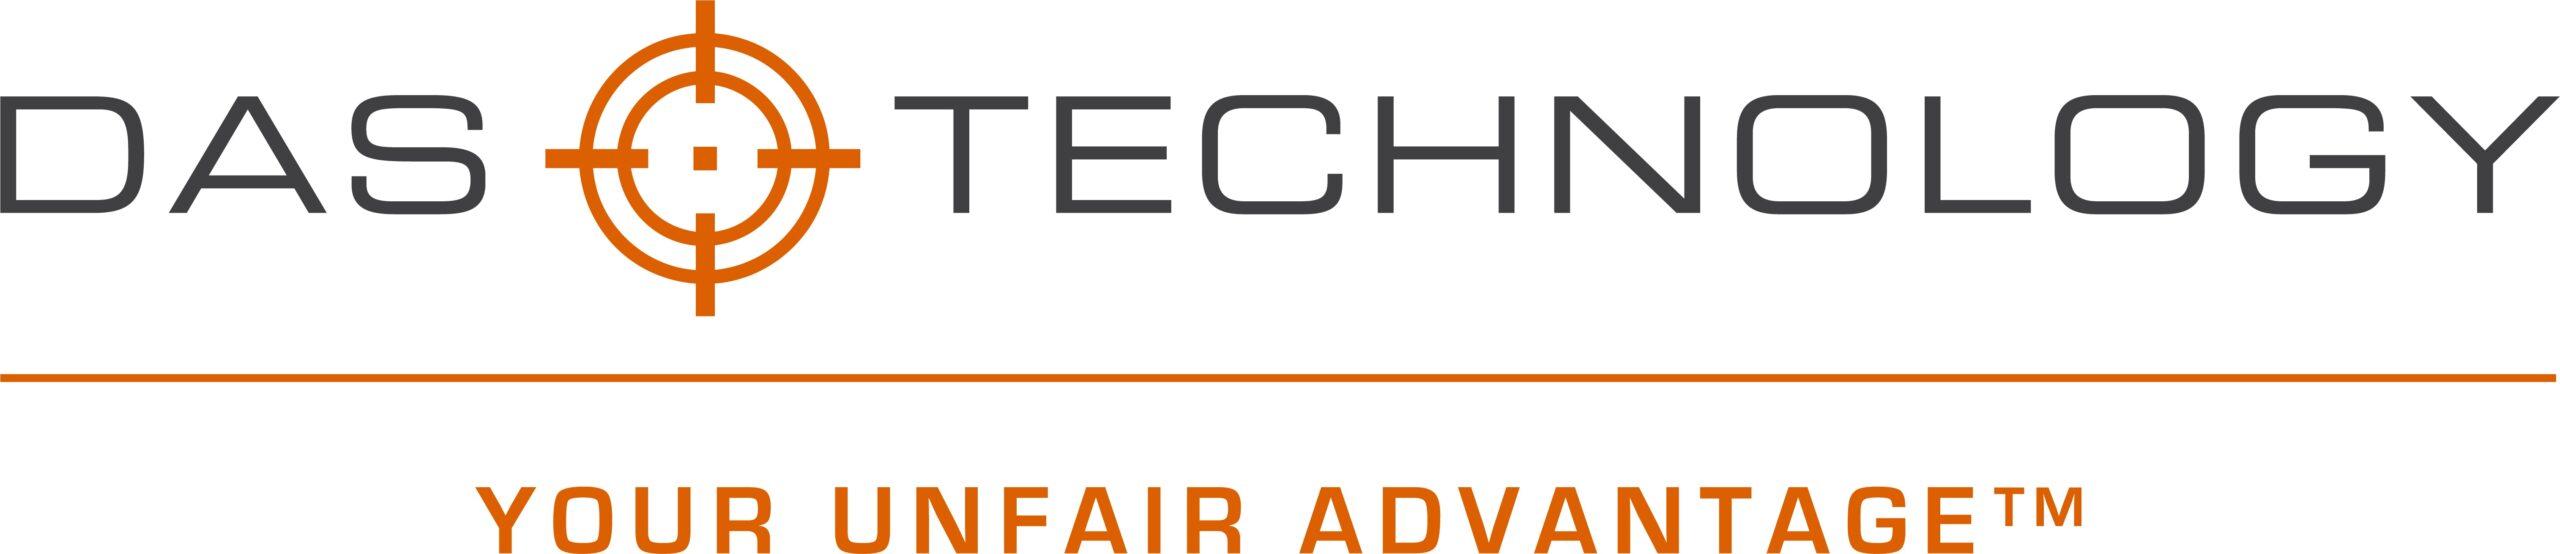 DAS Technology Logo With Tagline_Colored &amp; Horizontal